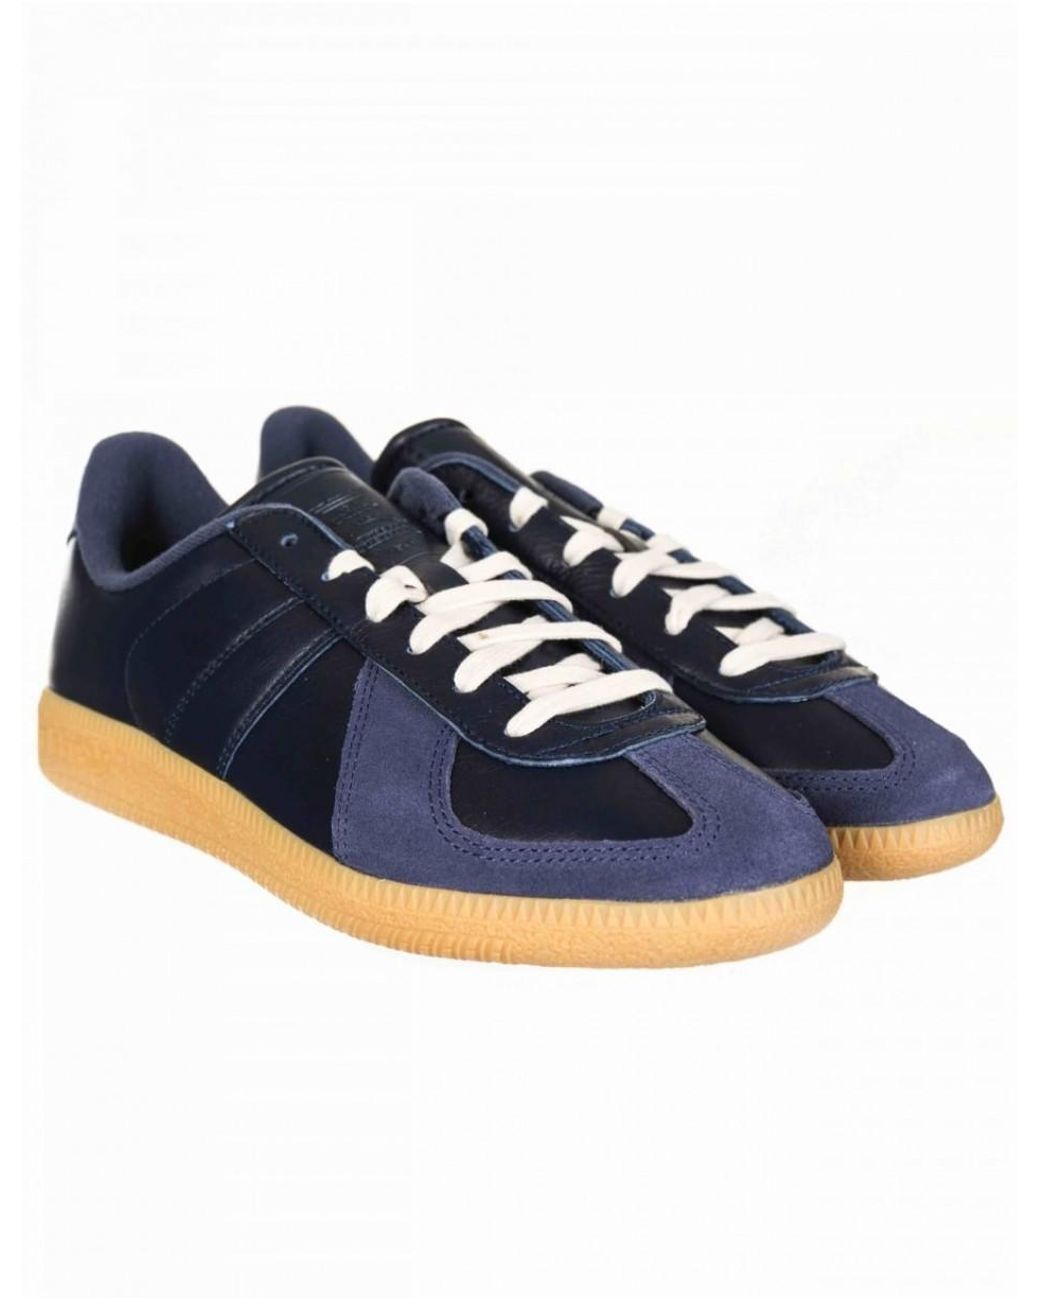 adidas Originals Leather Bw Army Shoes in Blue for Men | Lyst